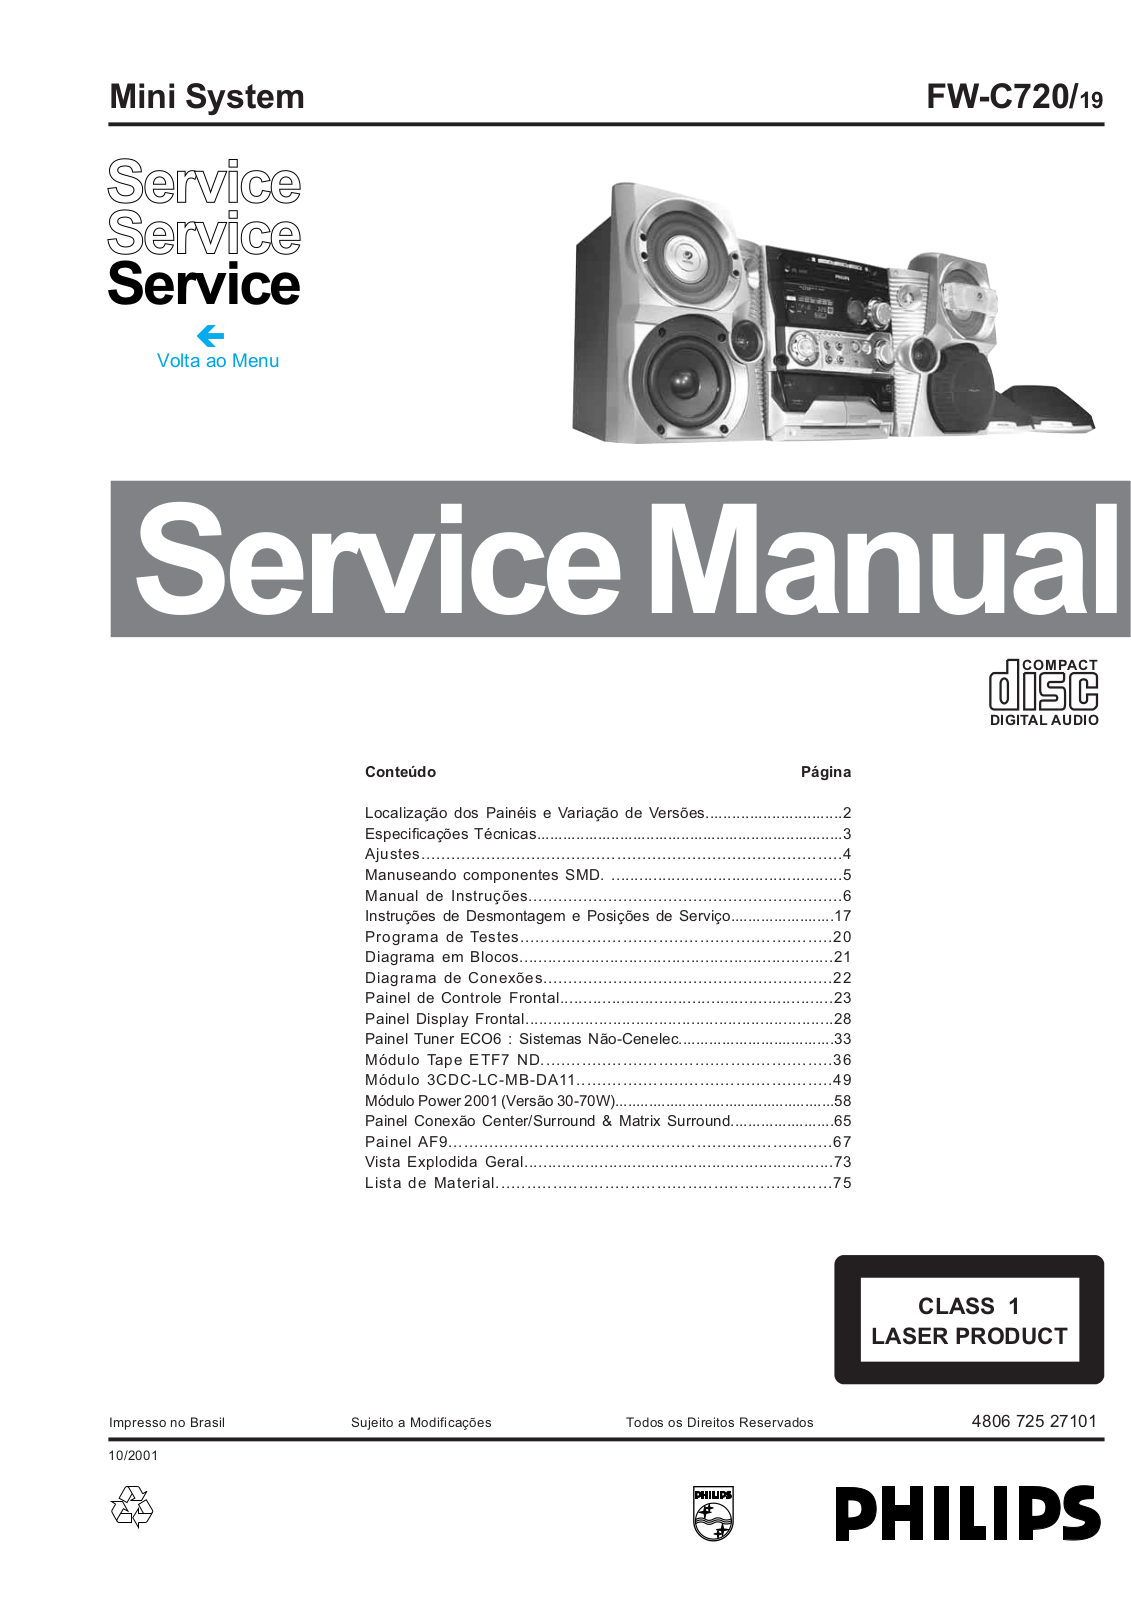 Philips FWC-720 Service Manual